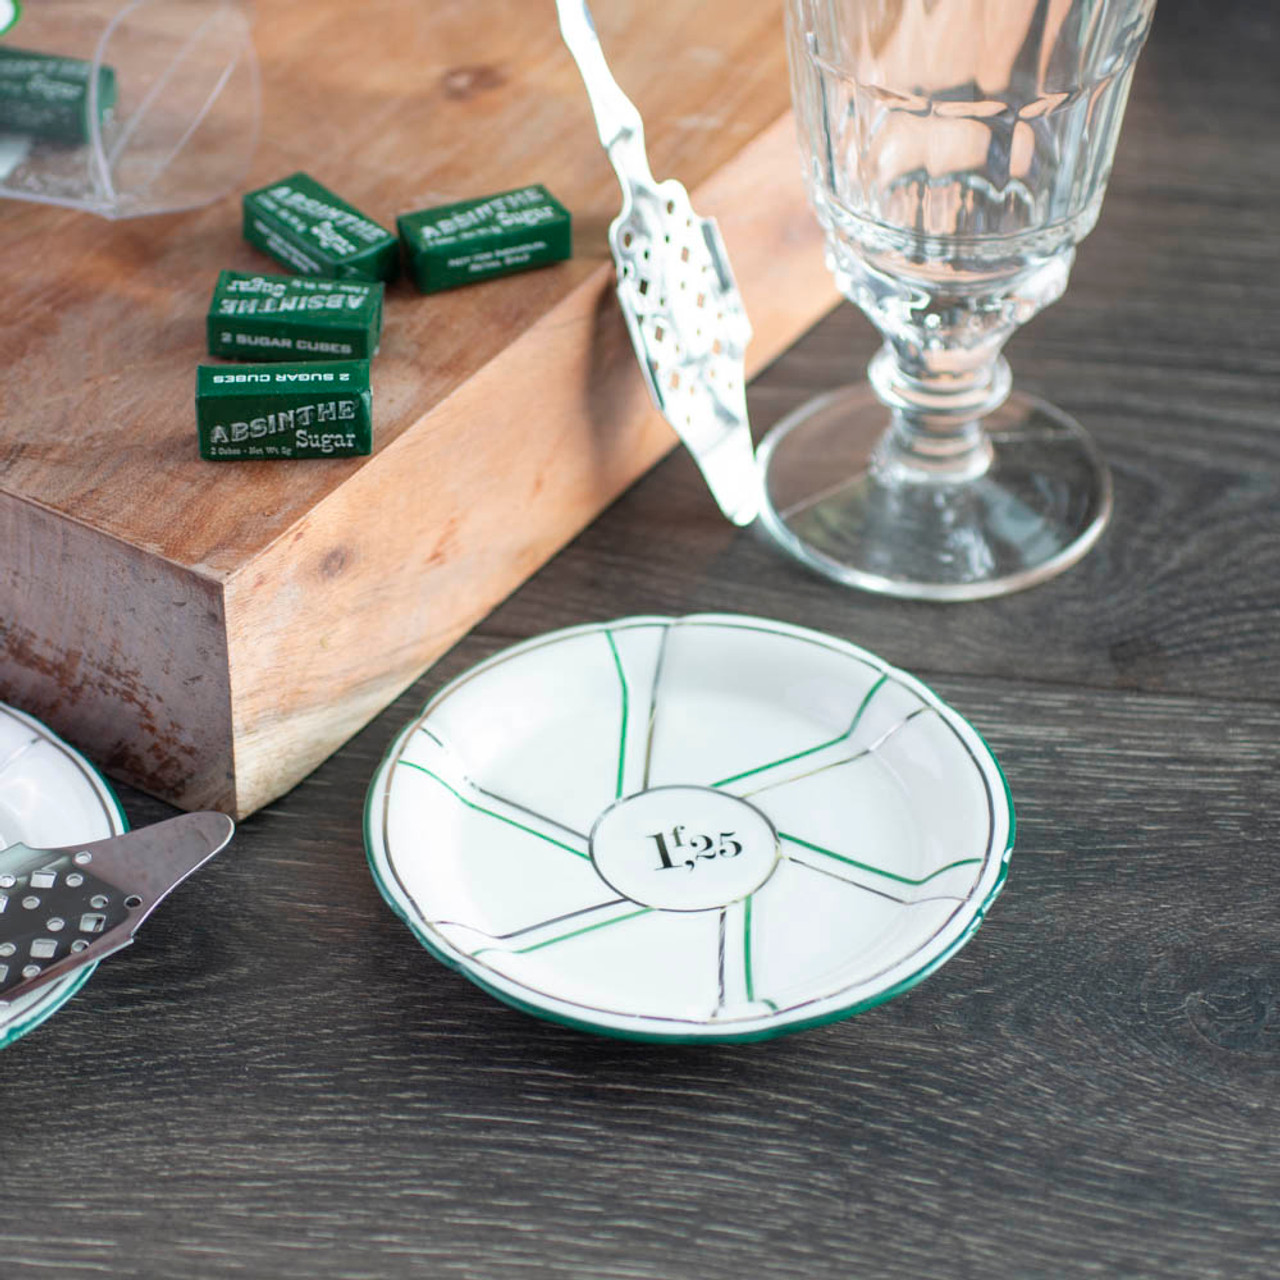 https://cdn11.bigcommerce.com/s-cznxq08r7/images/stencil/1280x1280/products/2510/570/1712-porcelain-absinthe-saucer-green-and-silver-pinwheel-accents-with-french-francs-design-3__65276.1590763686.jpg?c=1